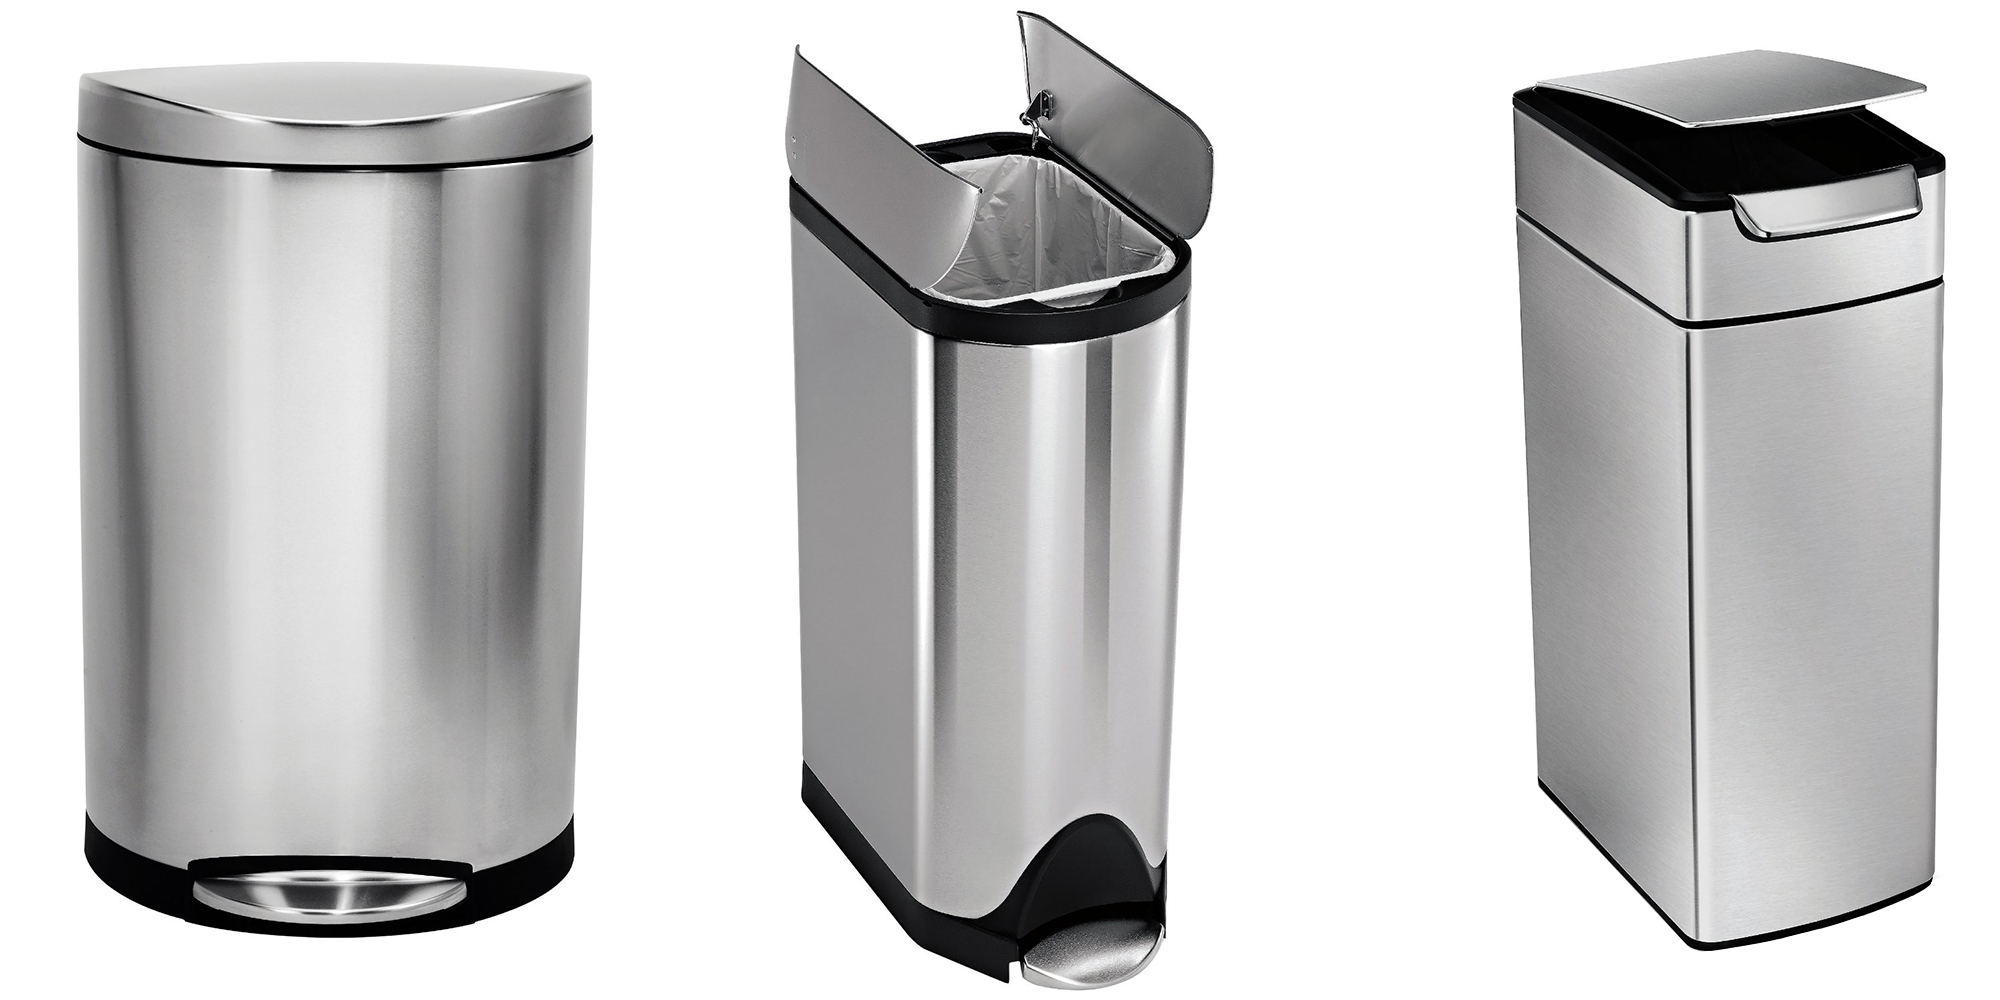 https://9to5toys.com/wp-content/uploads/sites/5/2016/04/simple-human-trash-cans.jpg